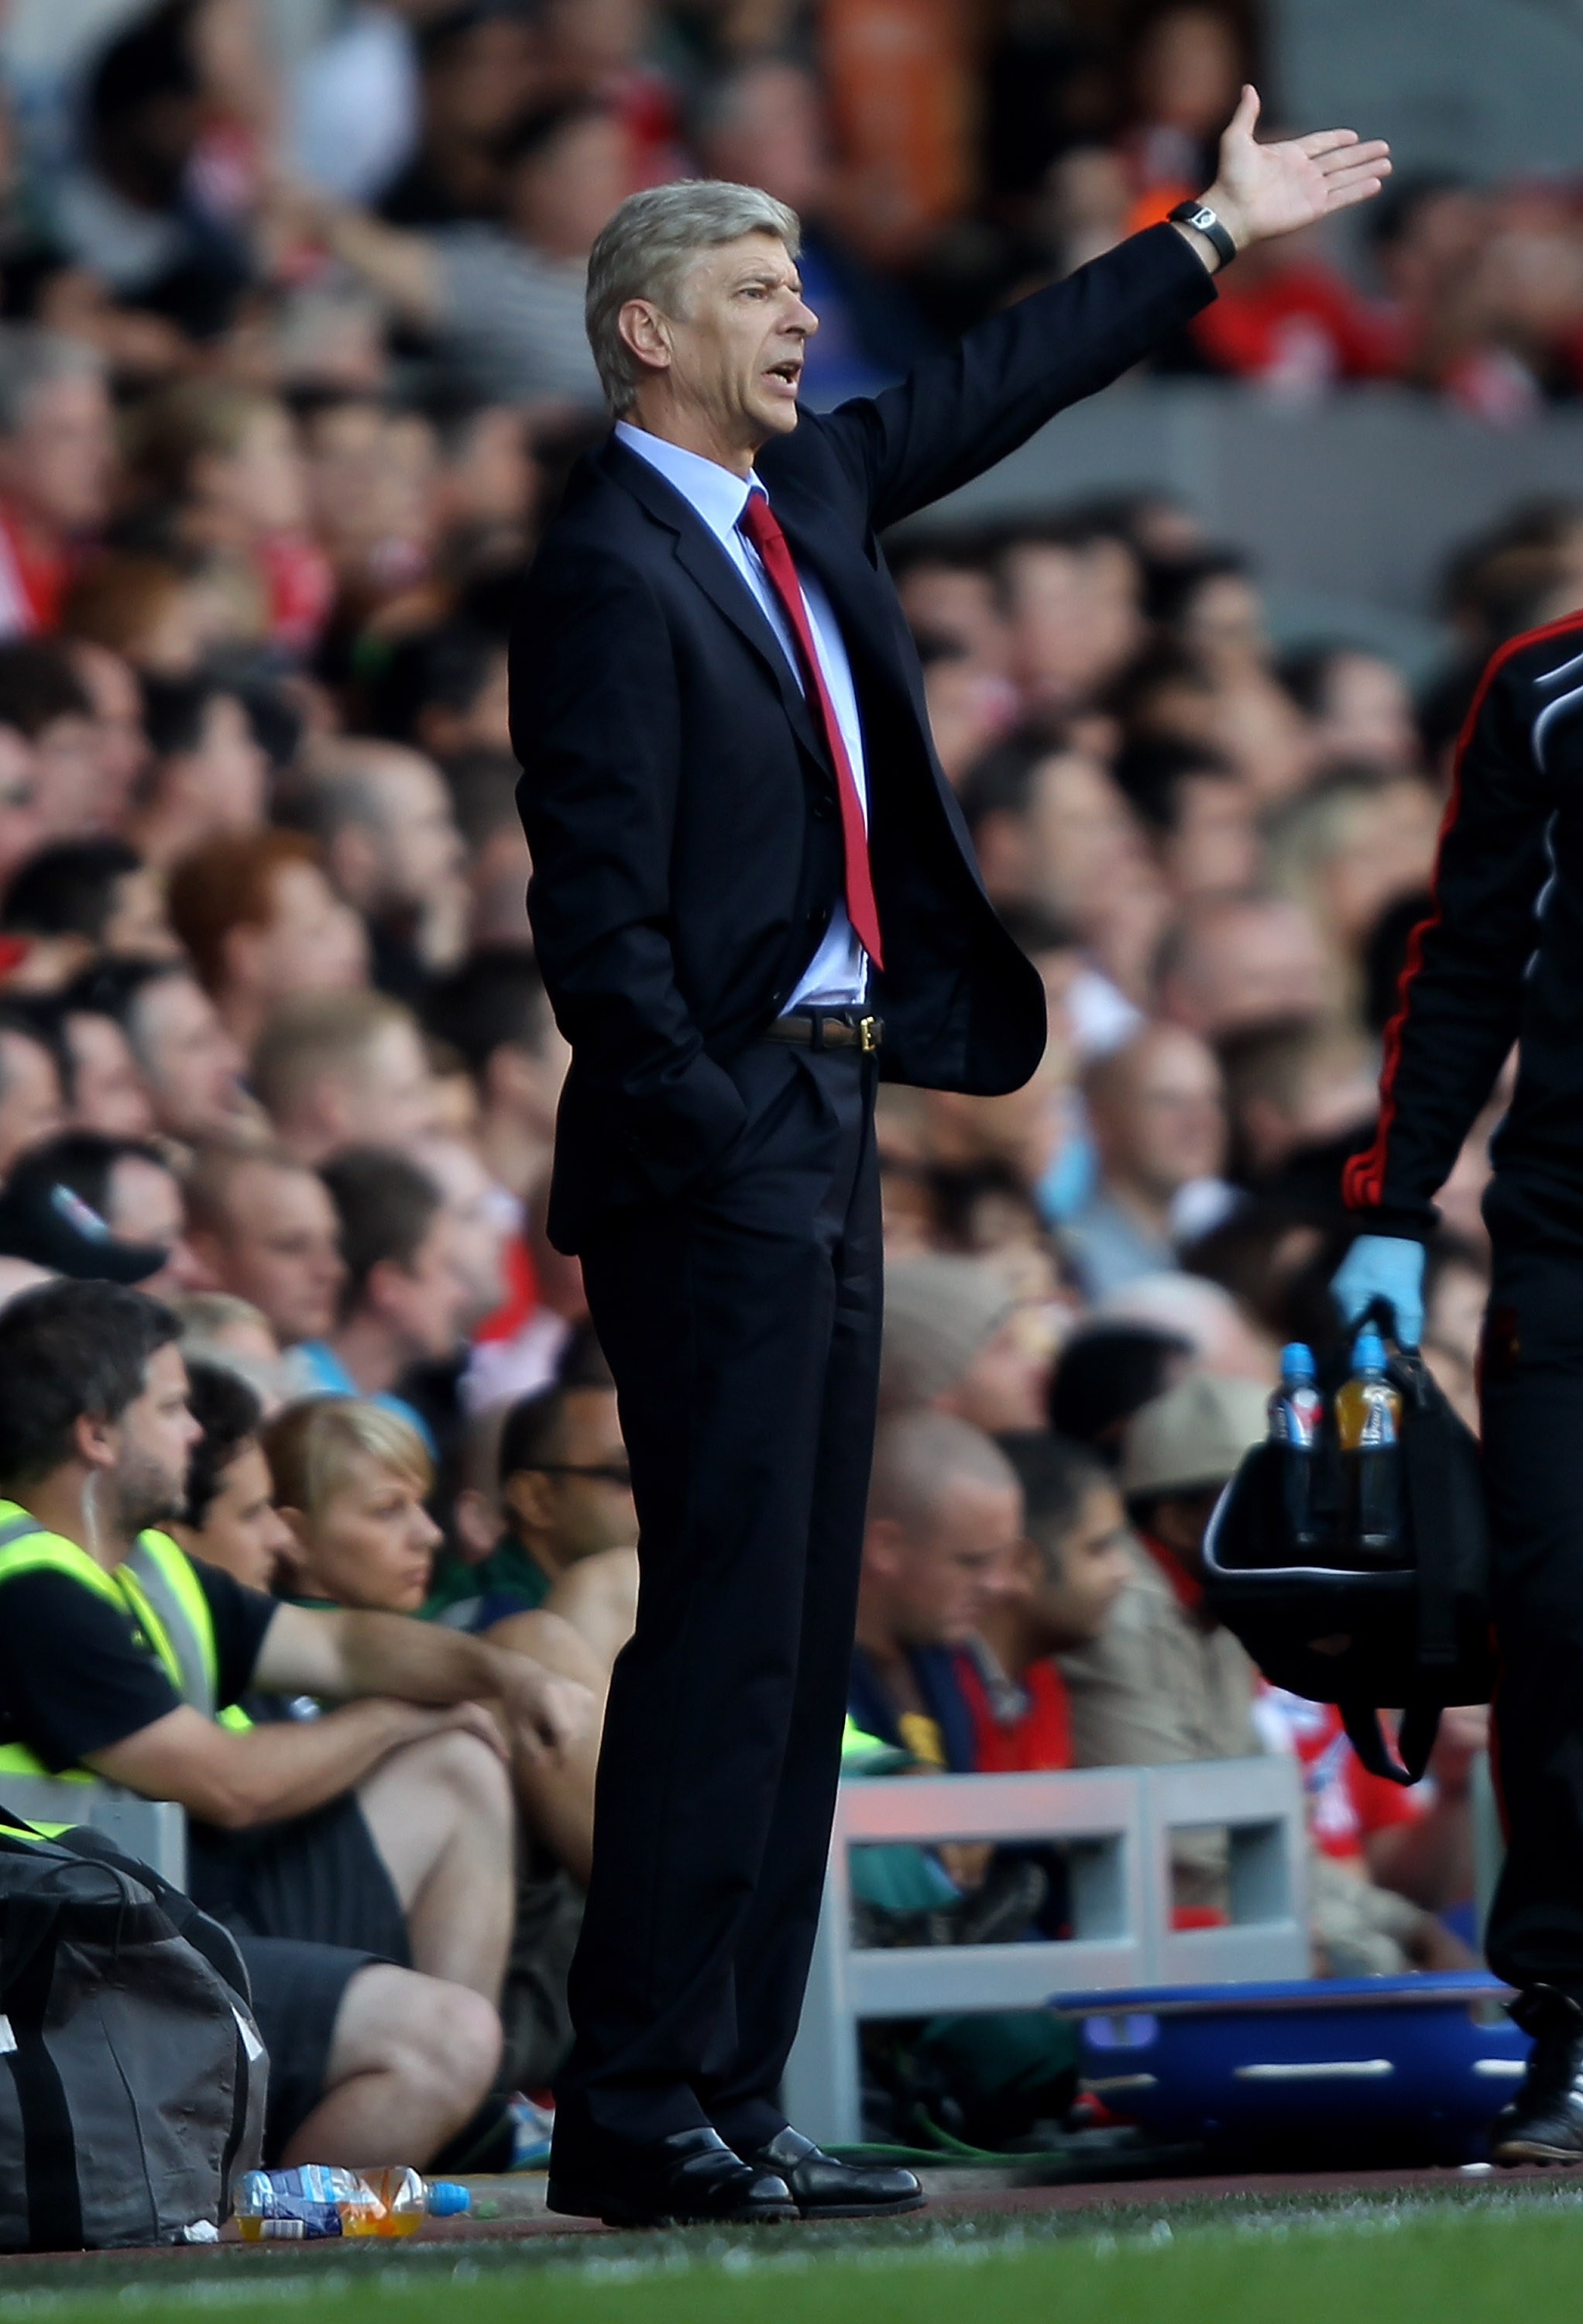 LIVERPOOL, ENGLAND - AUGUST 15:  Arsenal Manager Arsene Wenger gestures during the Barclays Premier League match between Liverpool and Arsenal at Anfield on August 15, 2010 in Liverpool, England. (Photo by Clive Brunskill/Getty Images)